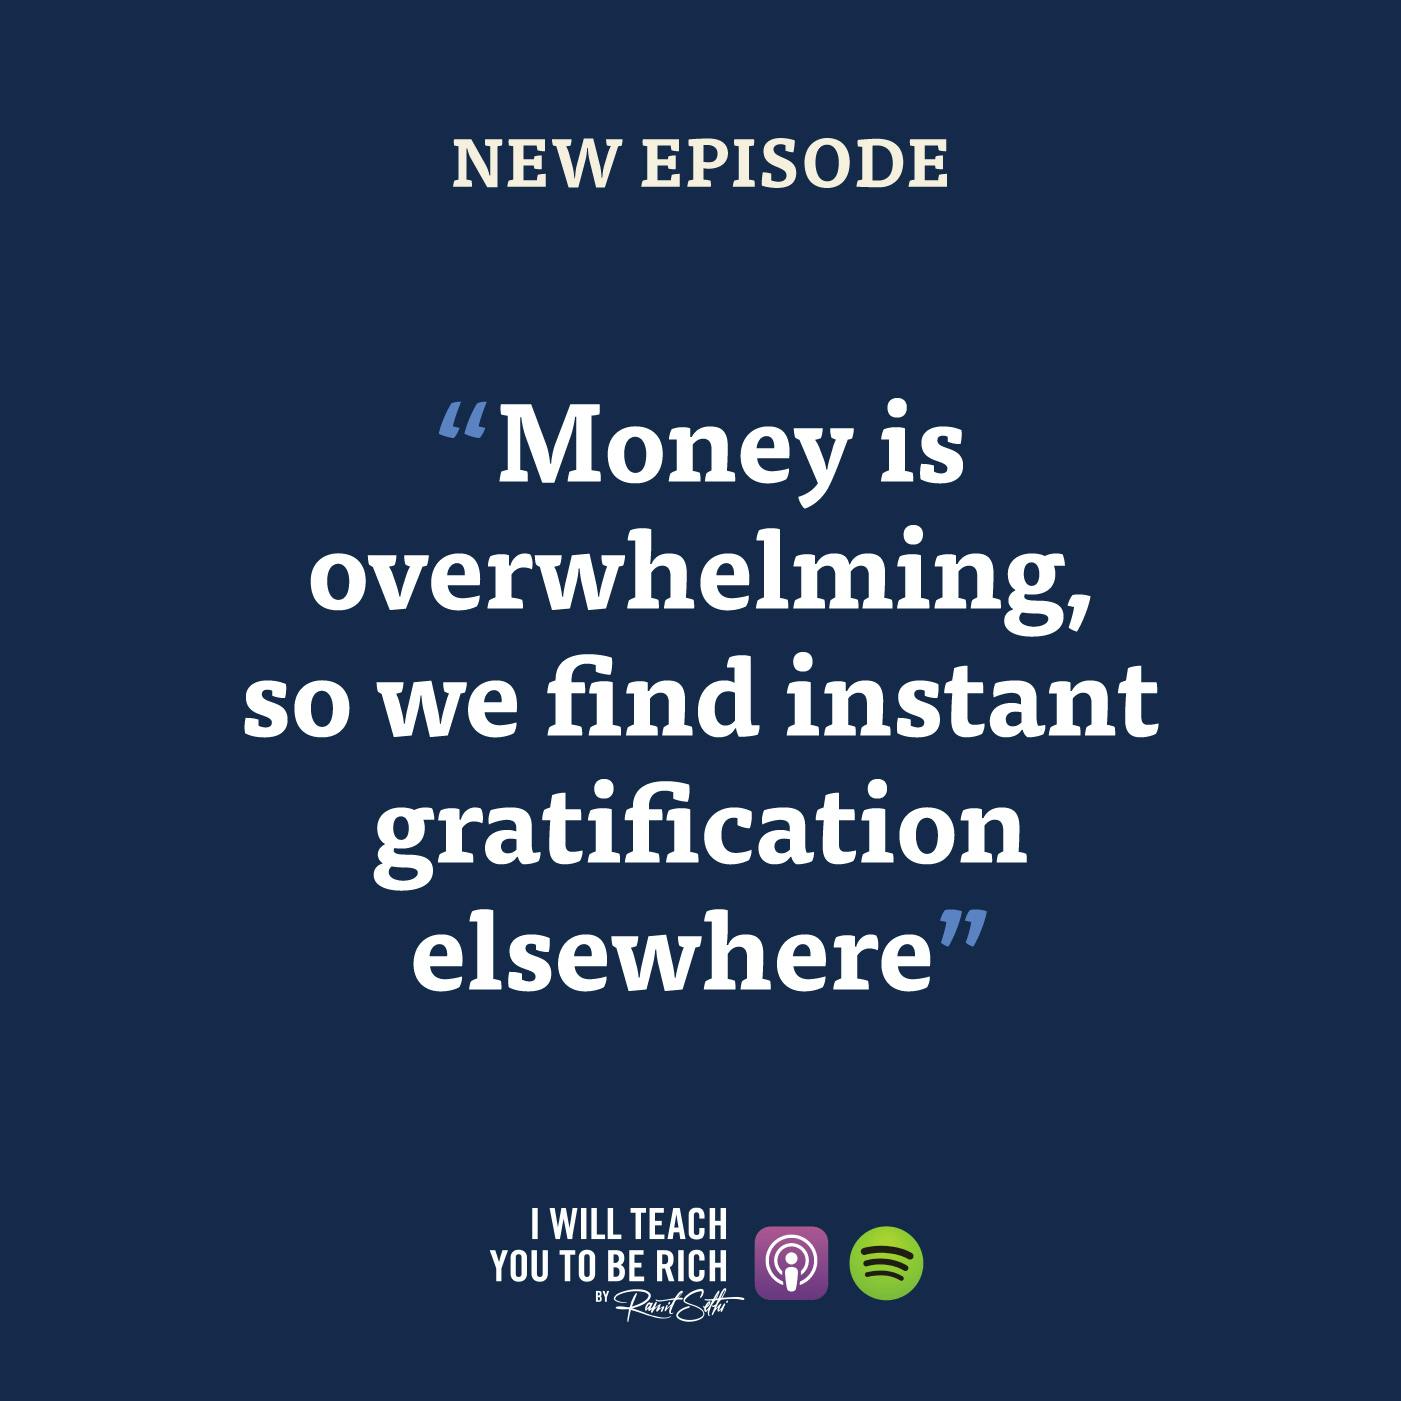 10. “Money is overwhelming so we find instant gratification elsewhere”